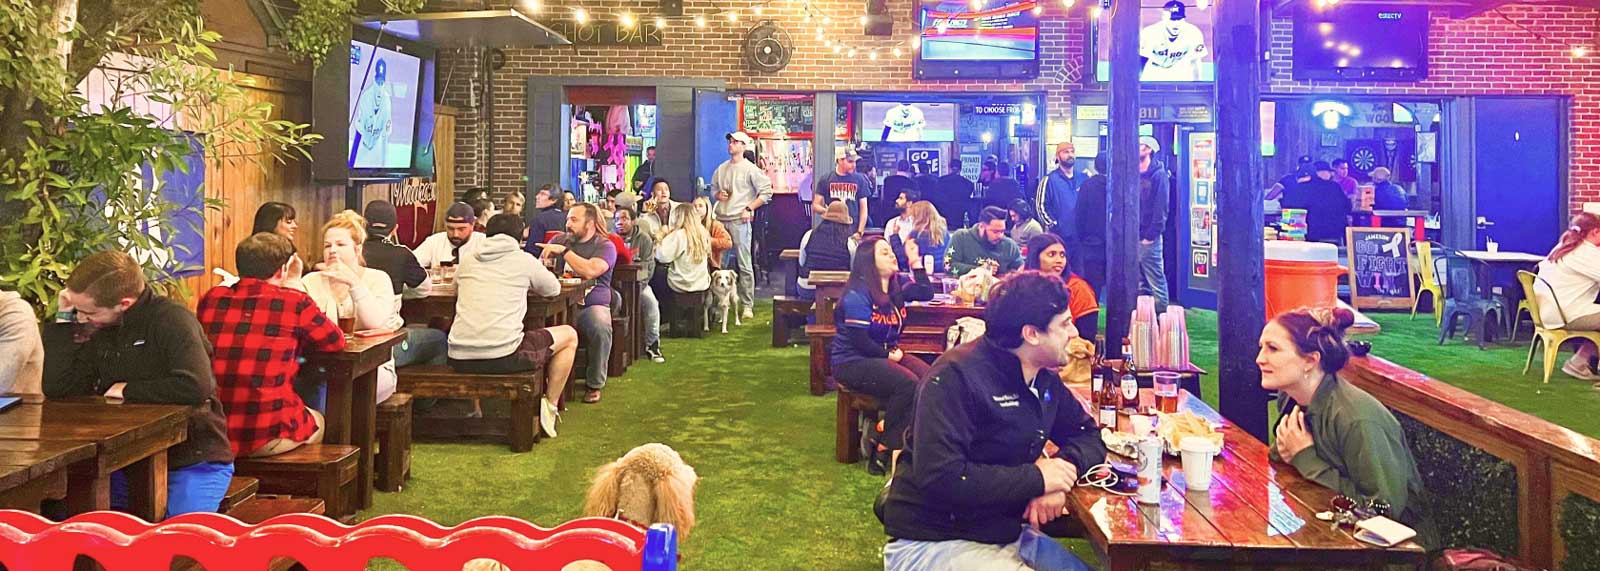 15 Sports Bars With Tasty Bites and the Spectator Spirit